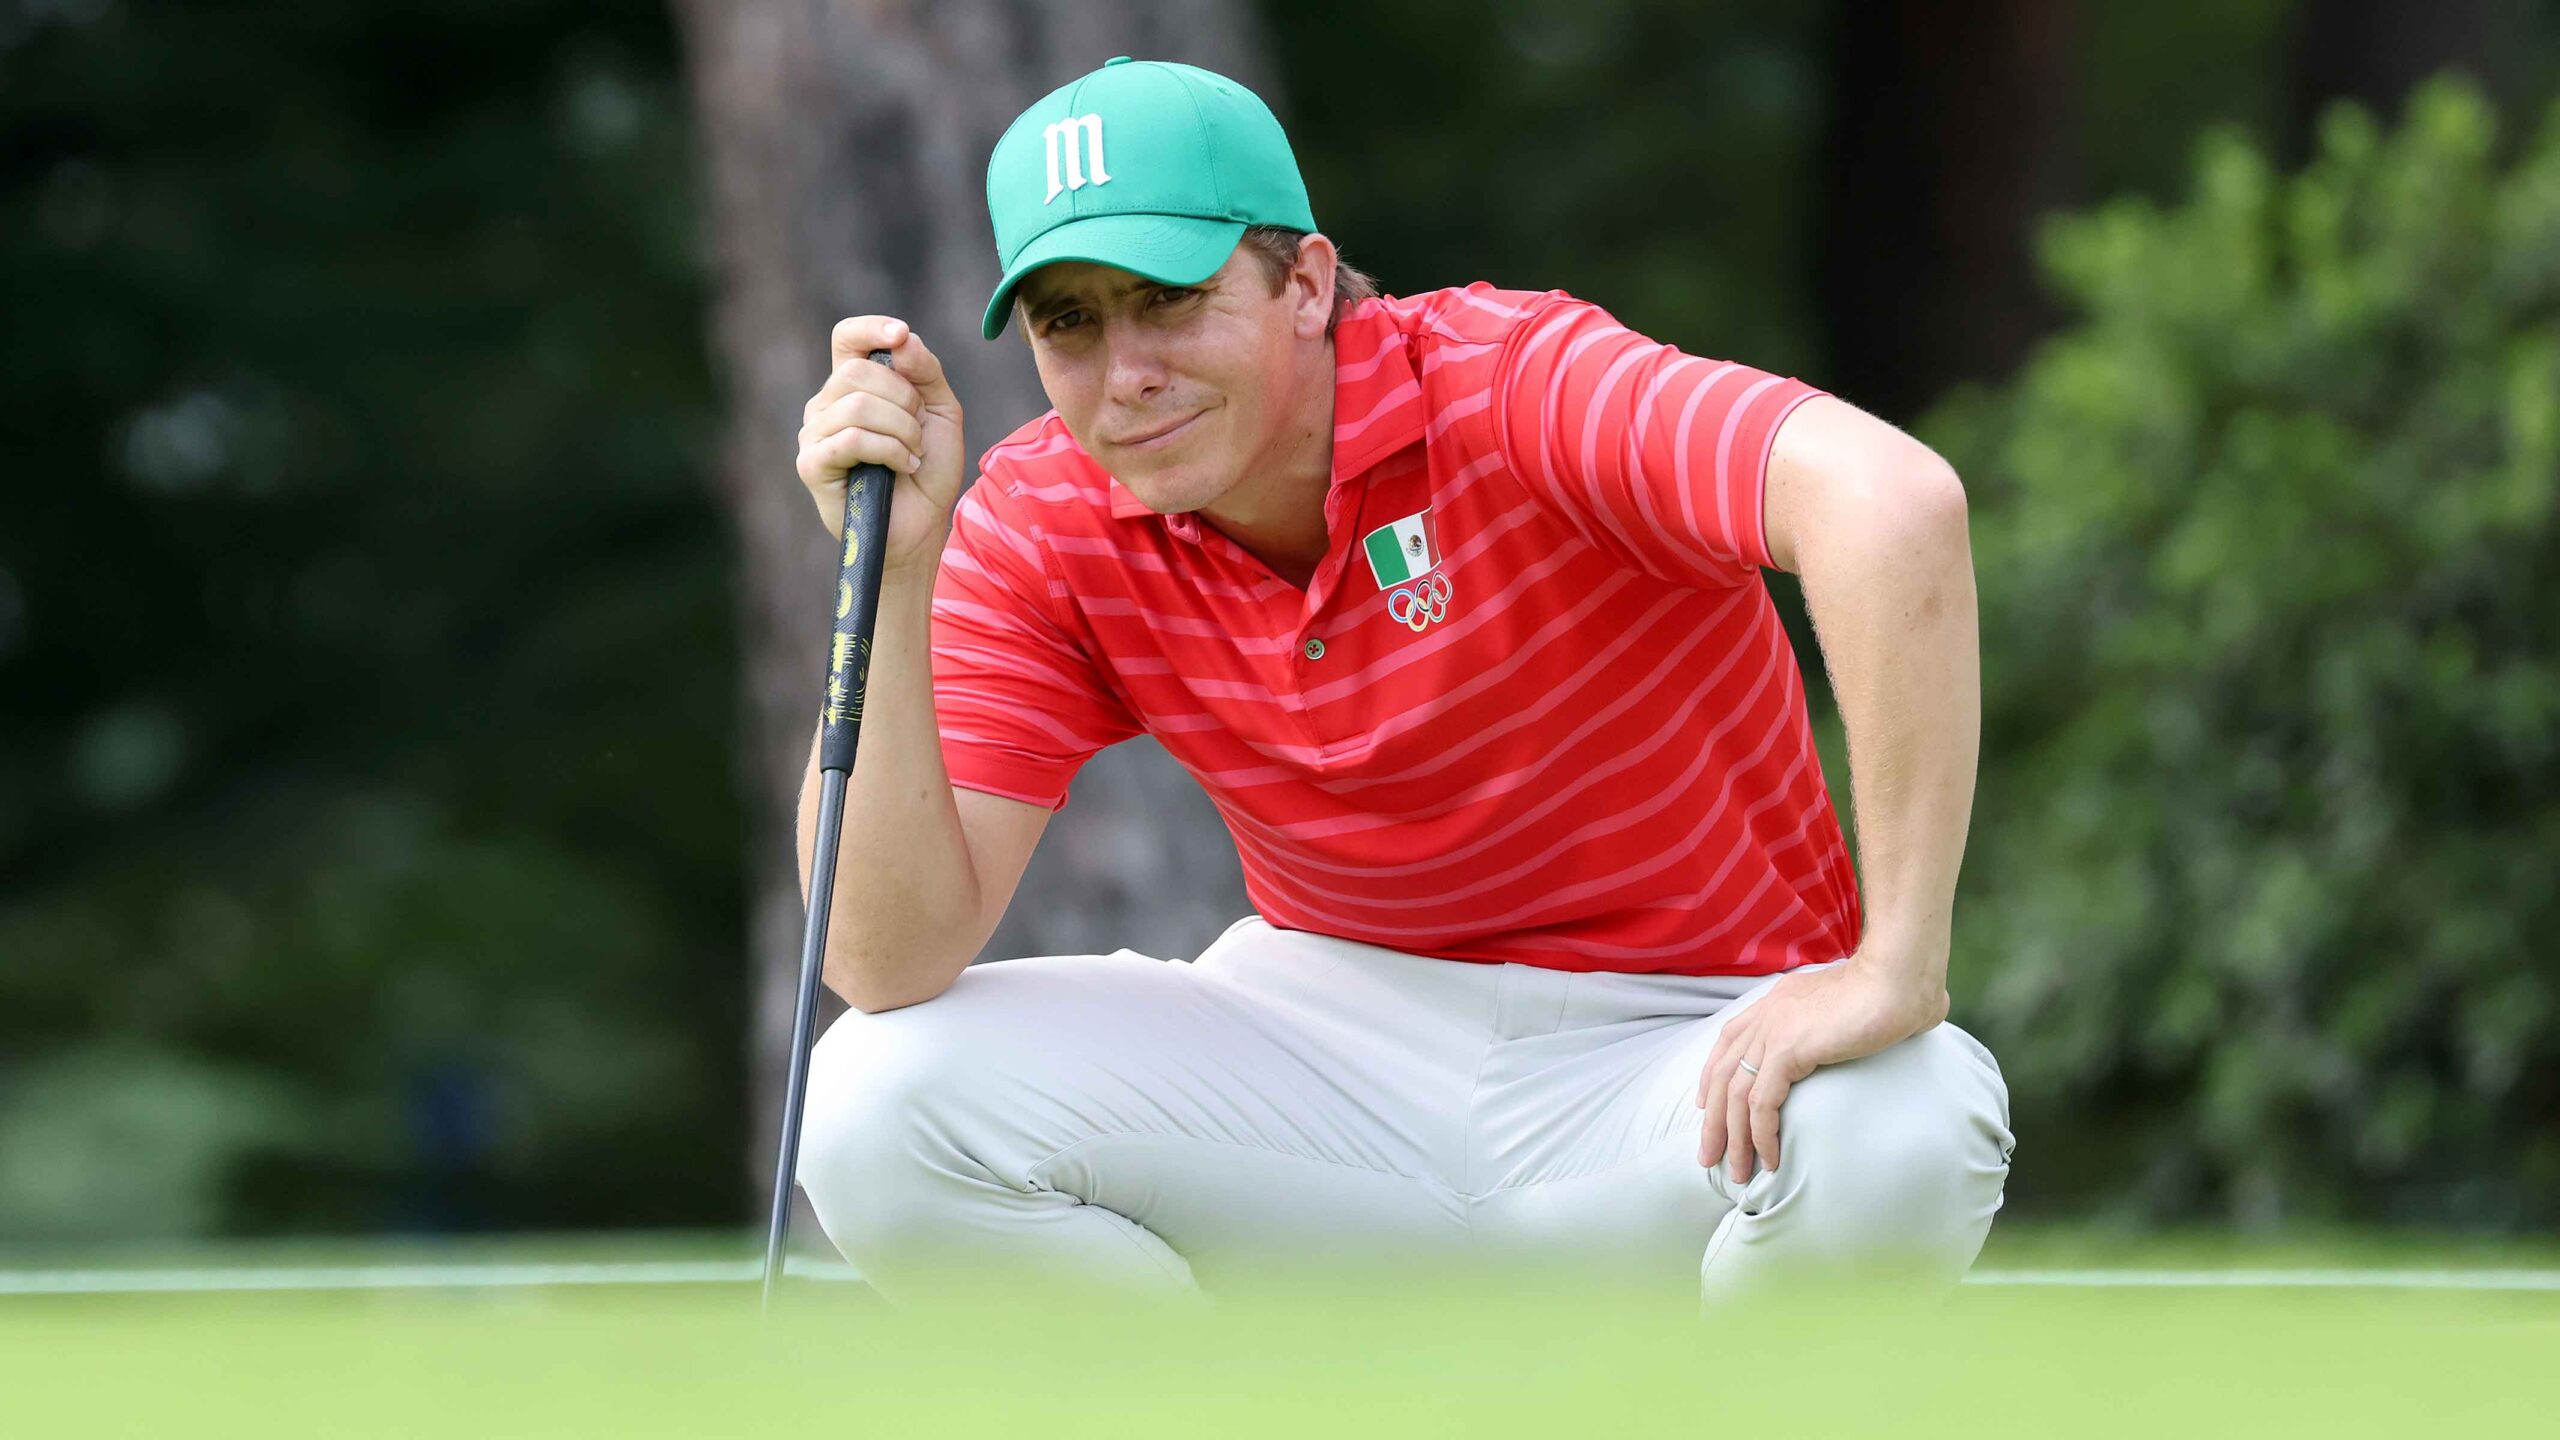 Down on Olympic golf? This golfer's experience will make you reconsider